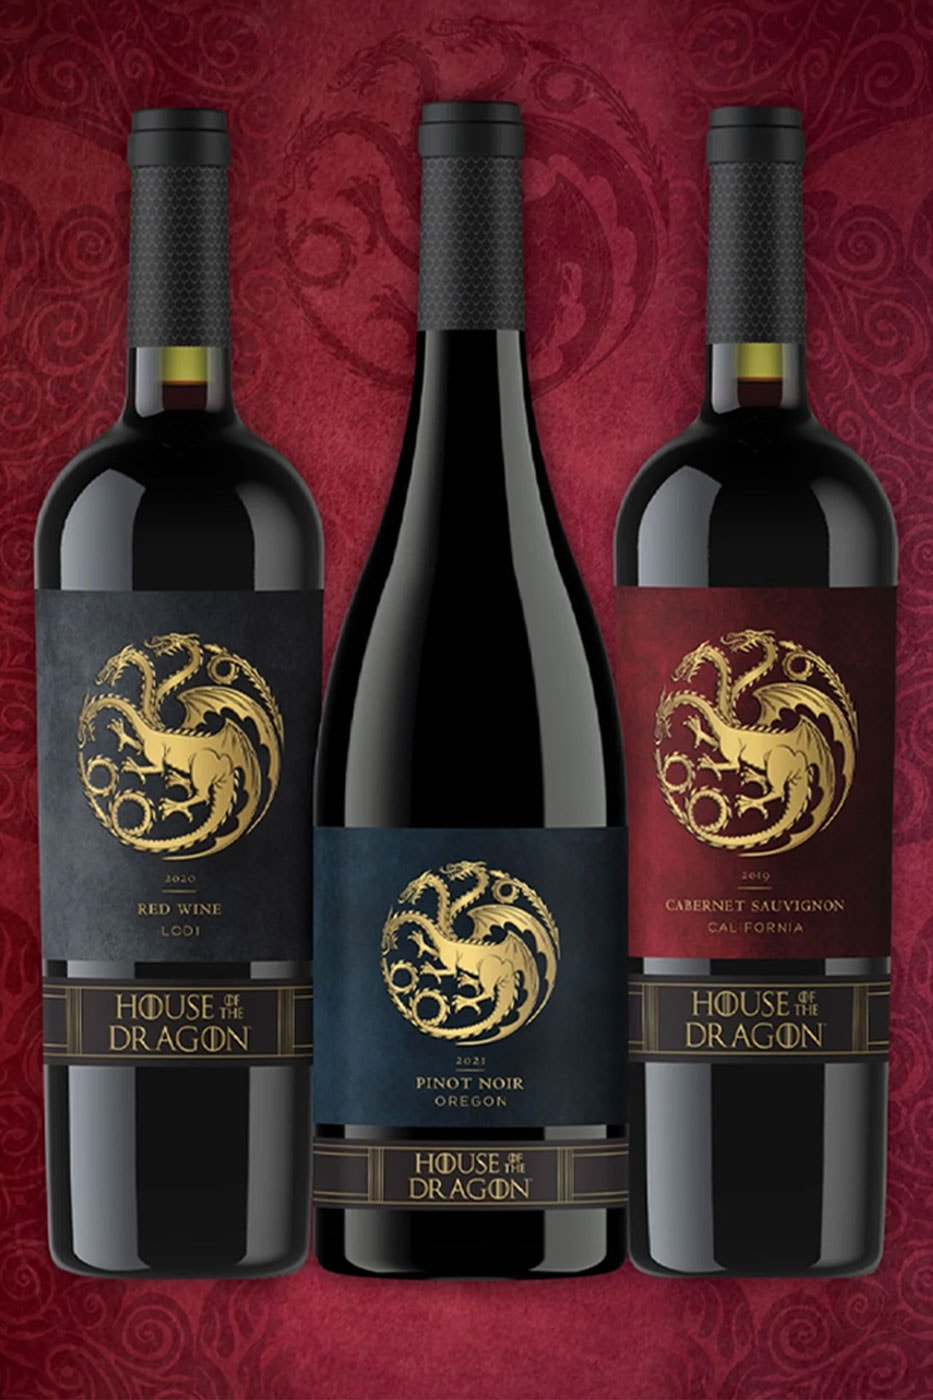 Game of Thrones HBO Vintage Wine Estates Warner Bros consumer products house of dragon hbo max series seven kingdoms cellars oregon pinot noir red blend california cabernet Sauvignon 20 usd release info date price